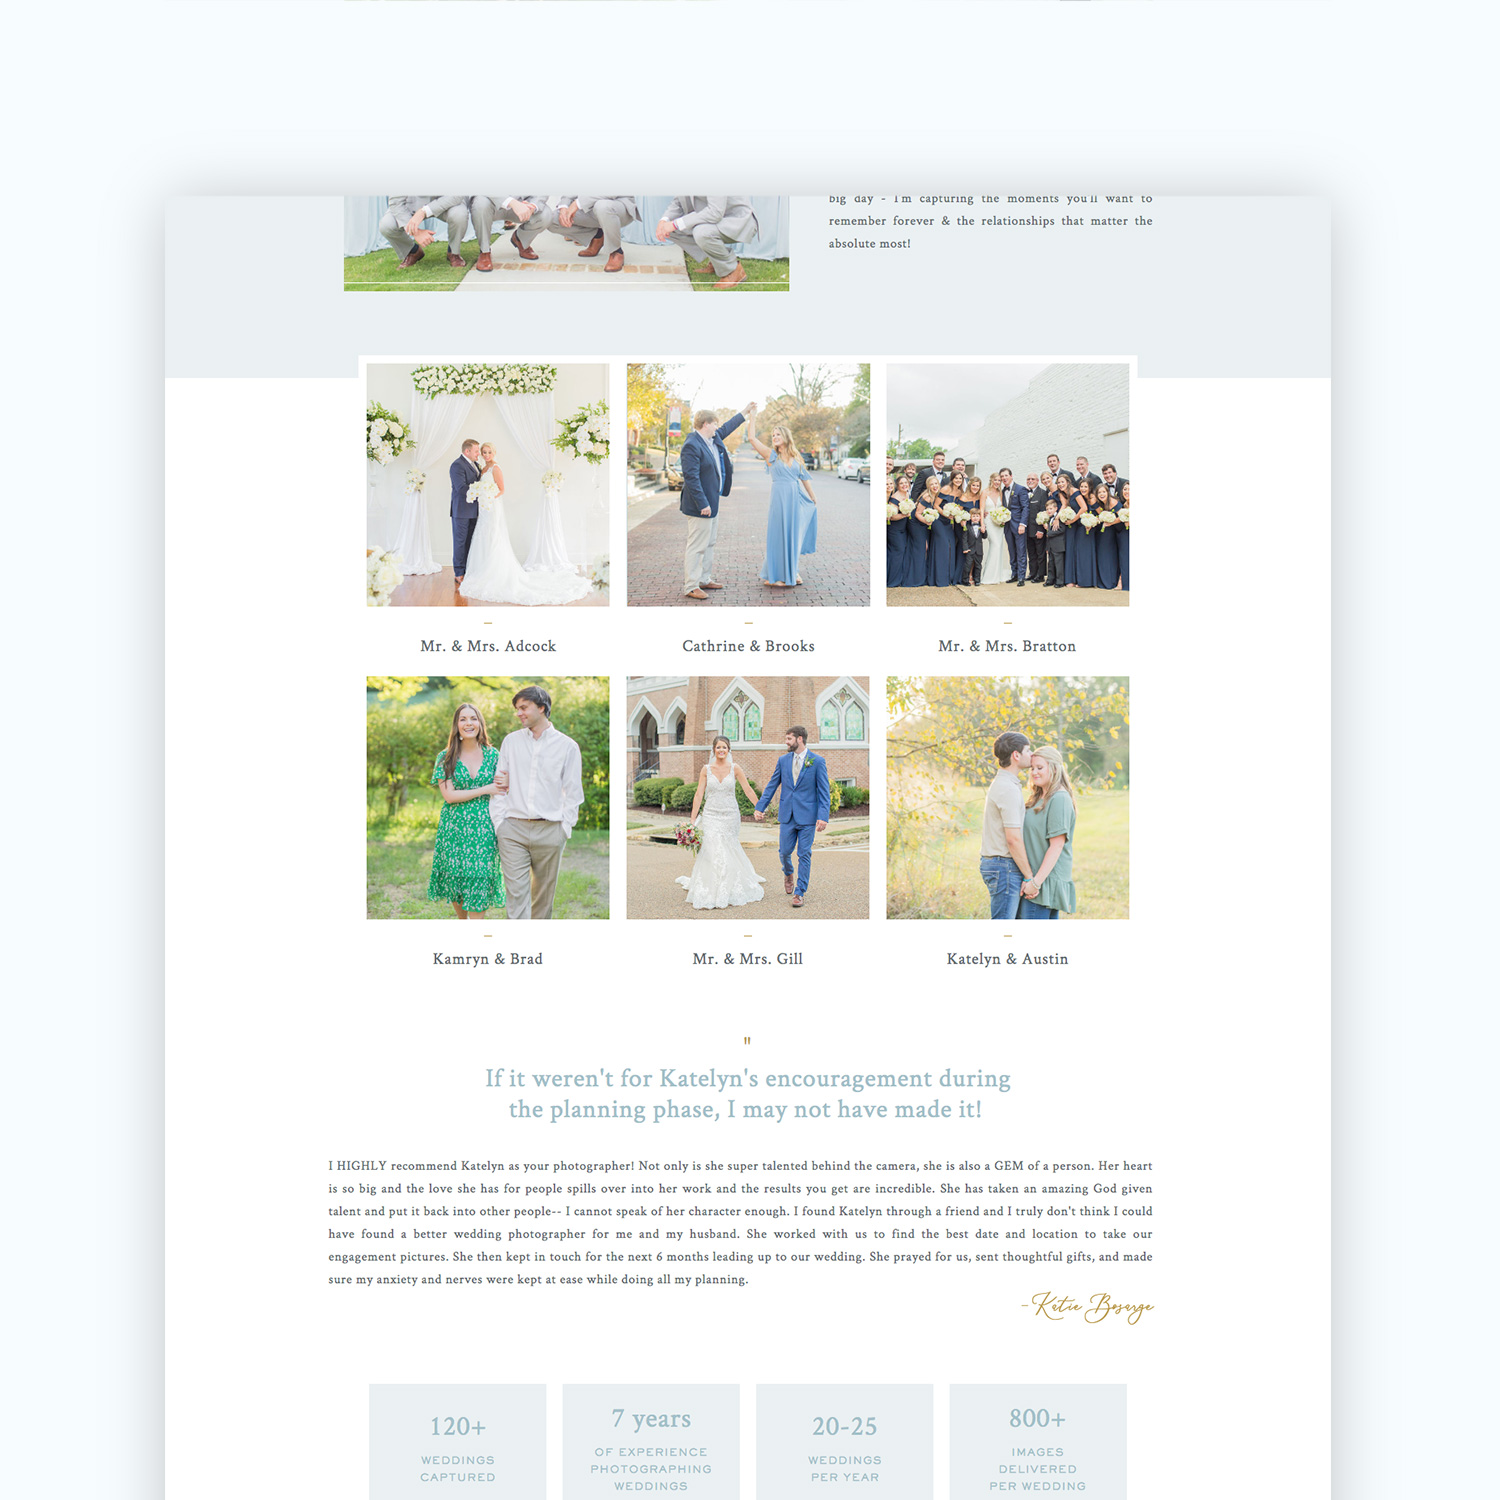 Katelyn Anne Photography’s wedding experience page design